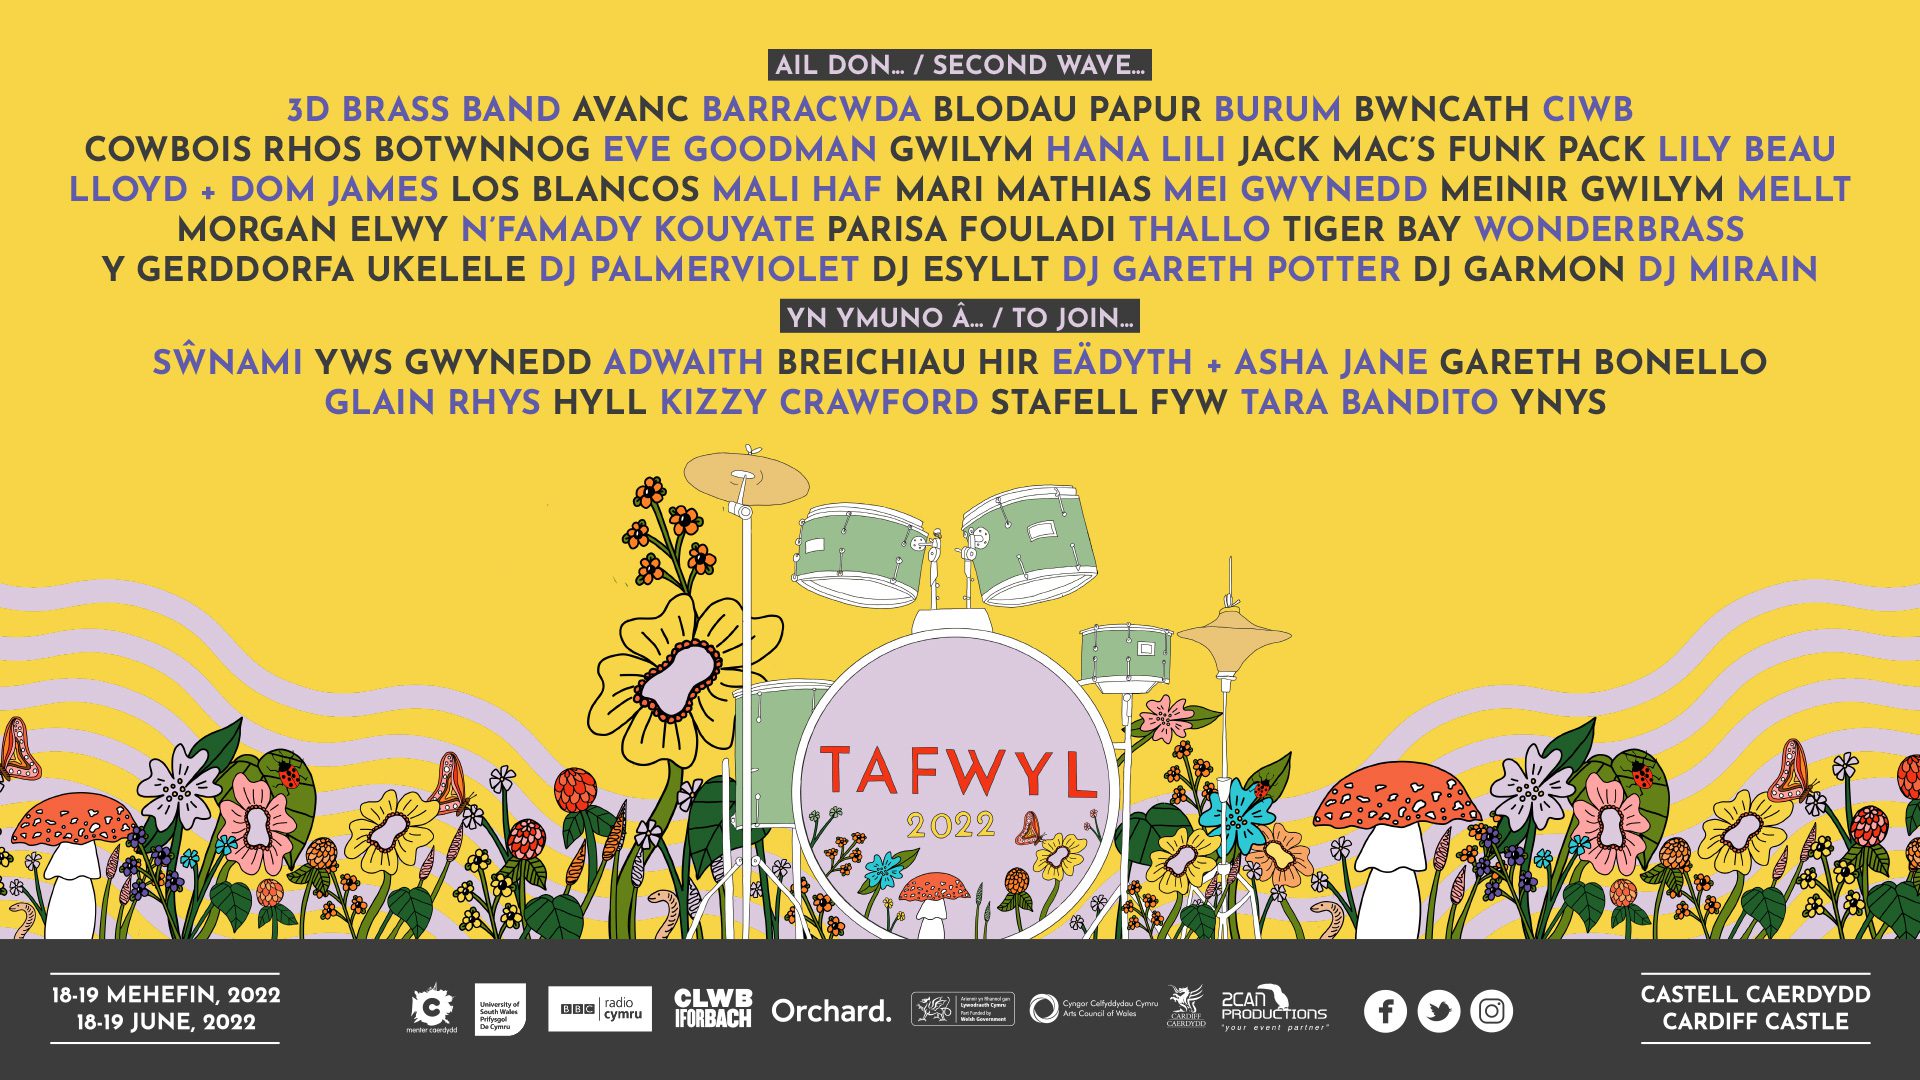 Tafwyl - Ail Don / Second Wave